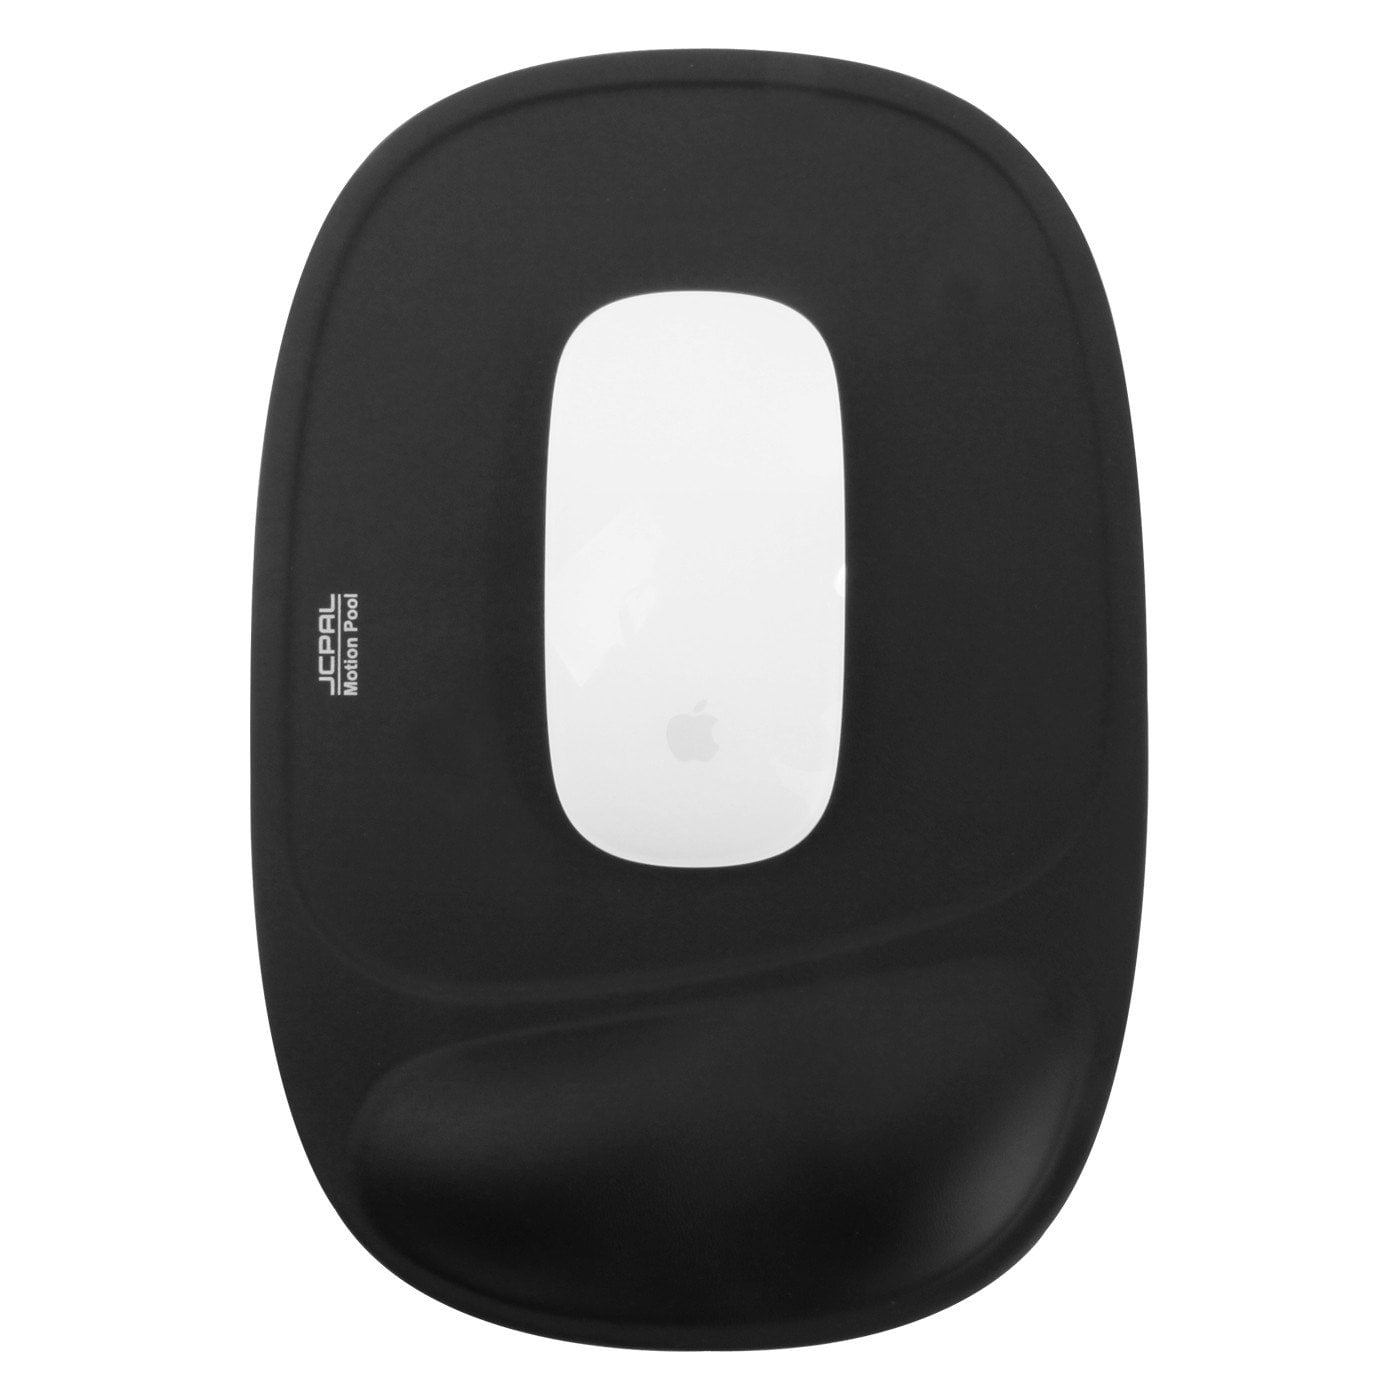 Mouse Pad with Wrist Support, Non-Slip - Monitor Mounts, Display Mounts  and Ergonomics